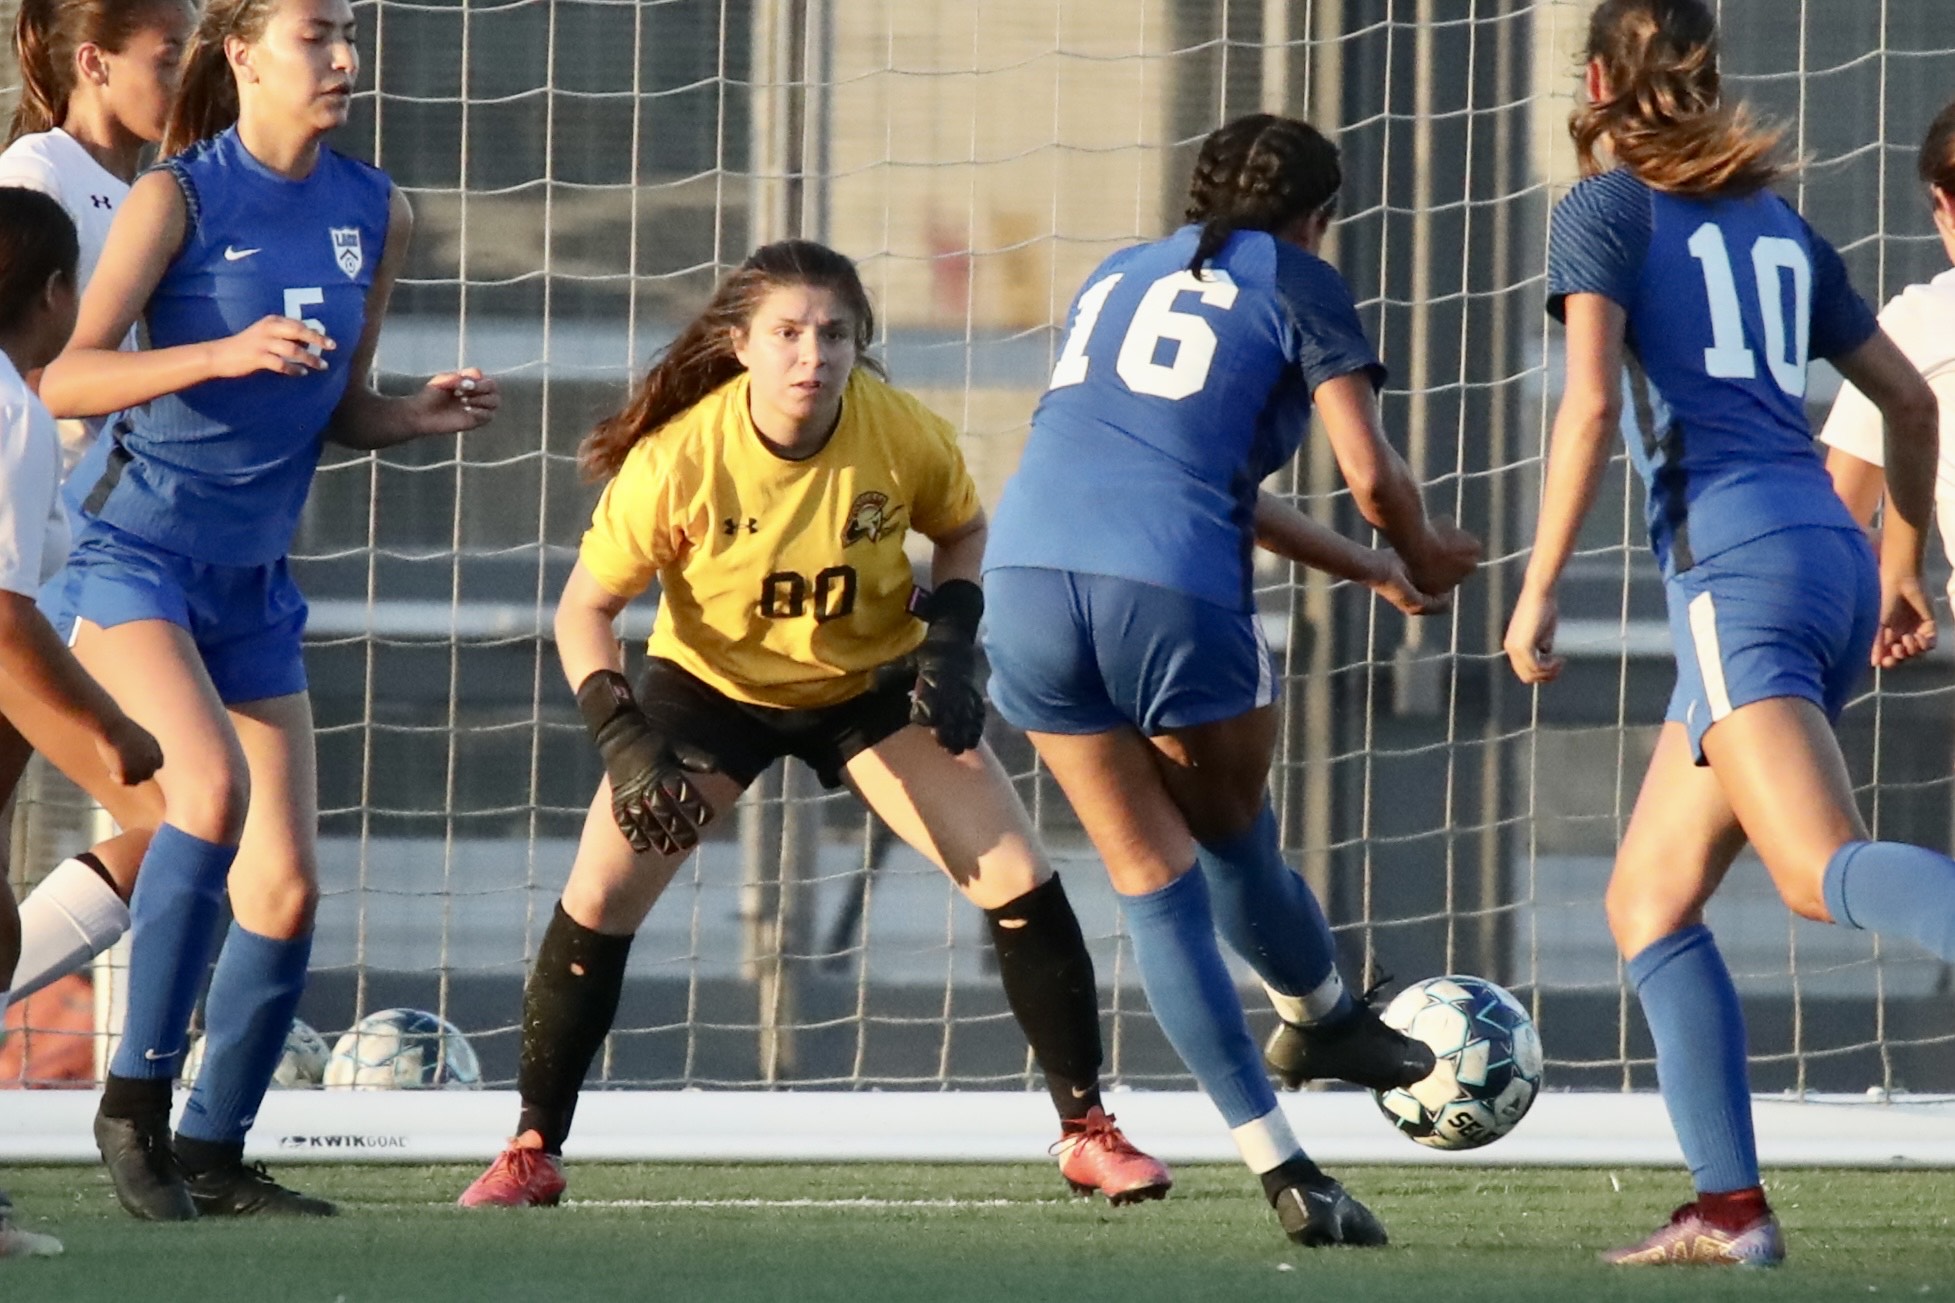 Christina Echeverrie gets ready to make one of her 14 saves during PCC's win at LA City College on Tuesday (photo by Michael Watkins).